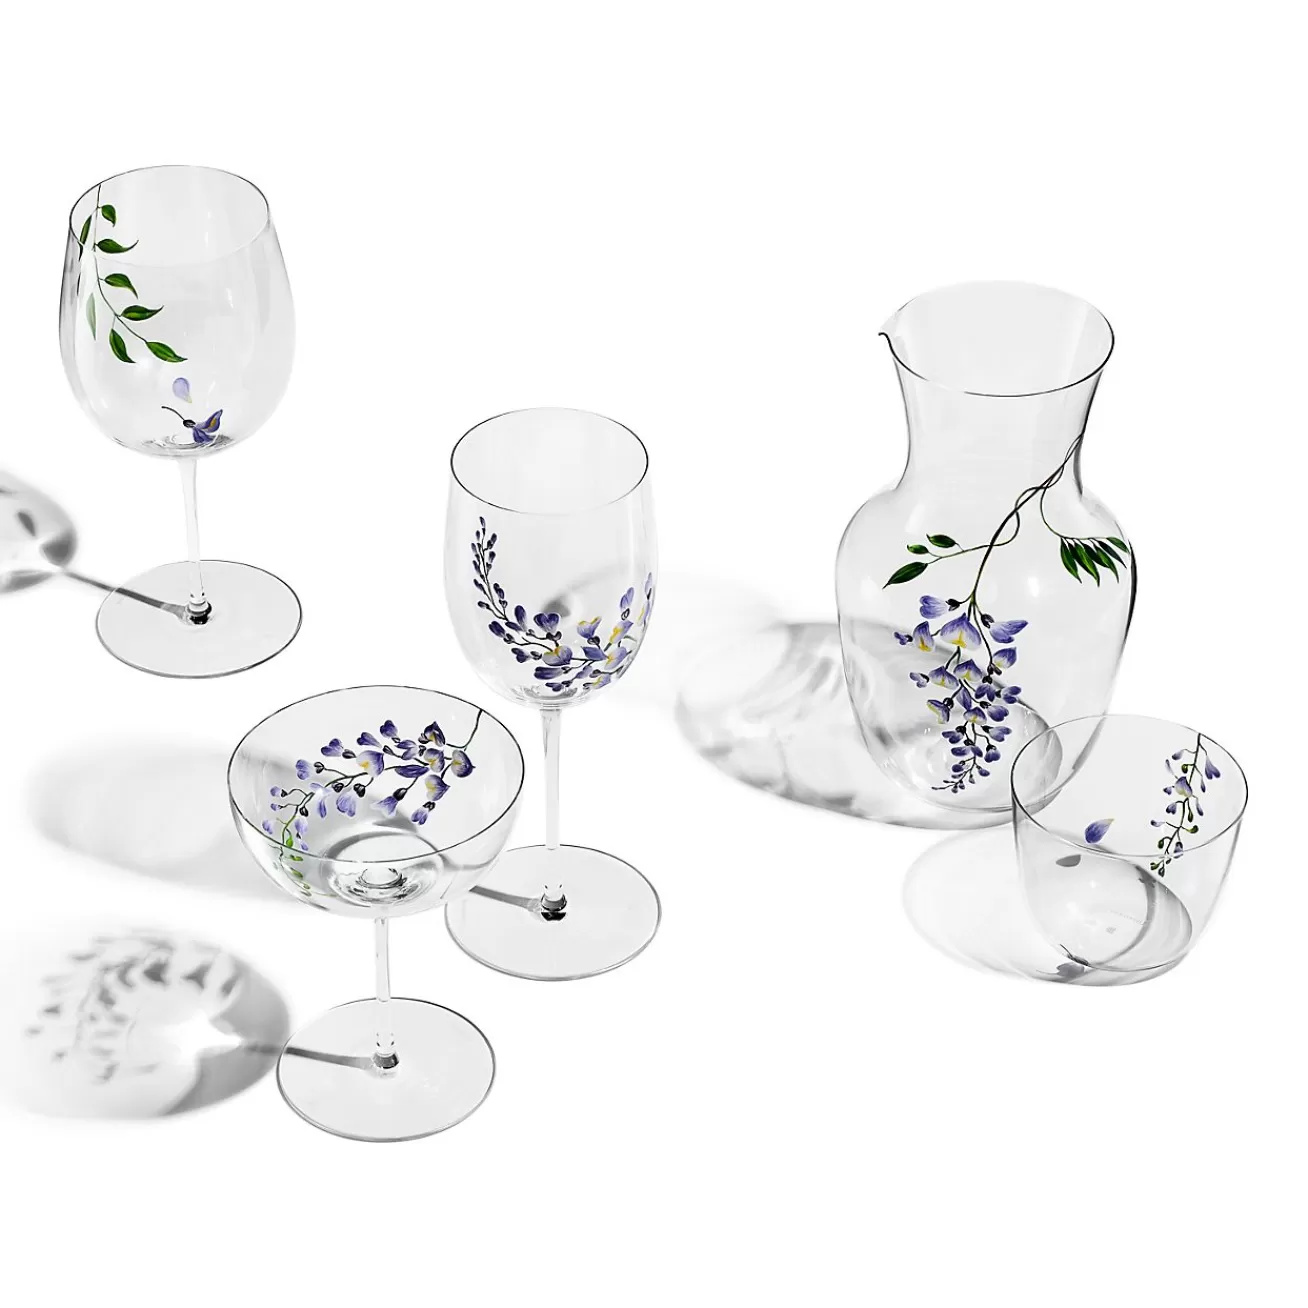 Tiffany & Co. Tiffany Wisteria Water Glass in Glass | ^ The Couple | Wedding Gifts